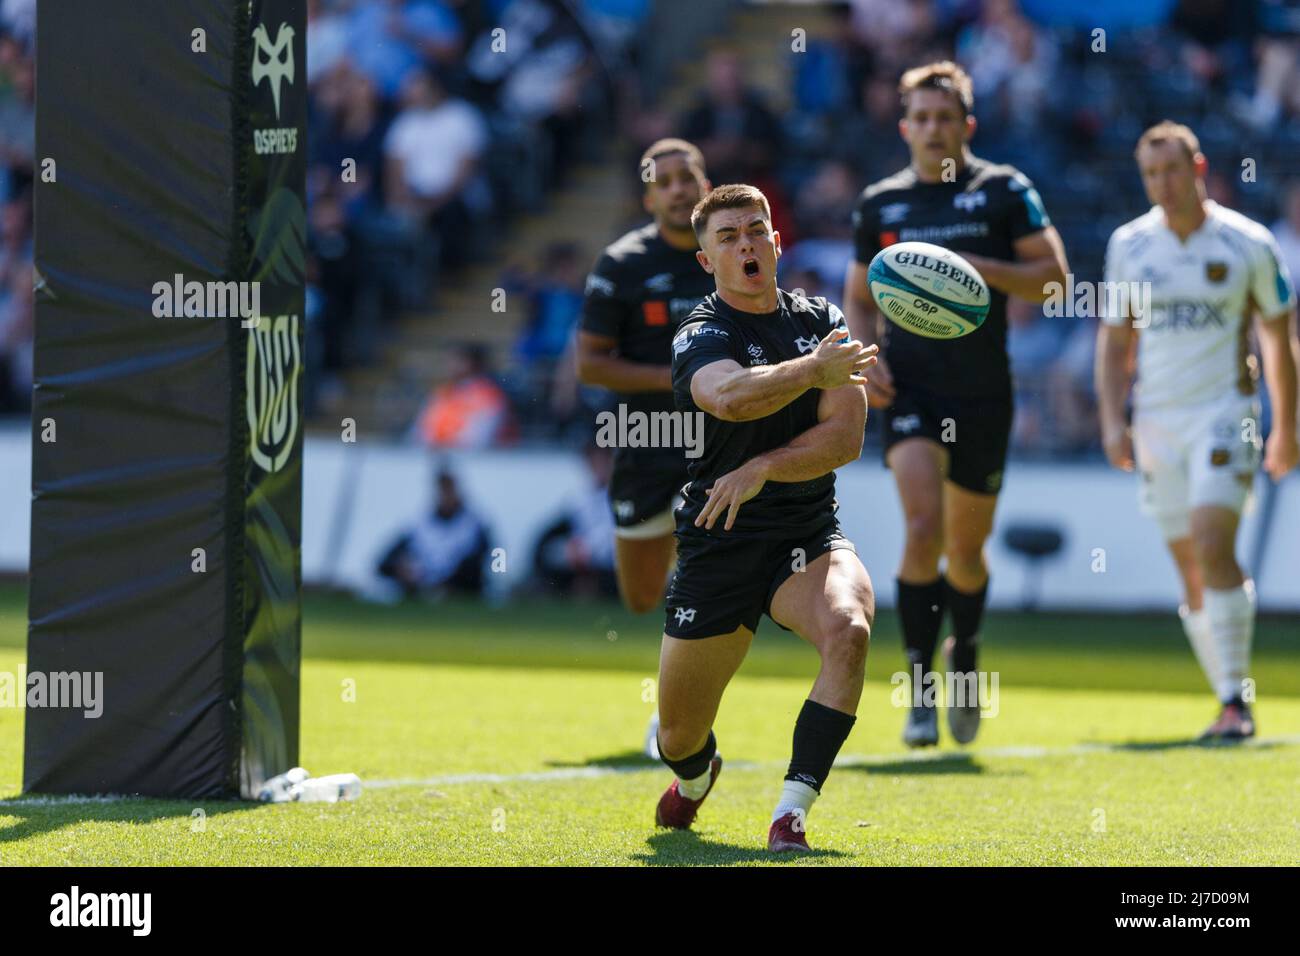 Swansea, UK. 8 May, 2022. Reuben Morgan-Williams of Ospreys celebrates after scoring a try during the Ospreys v Dragons United Rugby Championship Match. Credit: Gruffydd ThomasAlamy Stock Photo